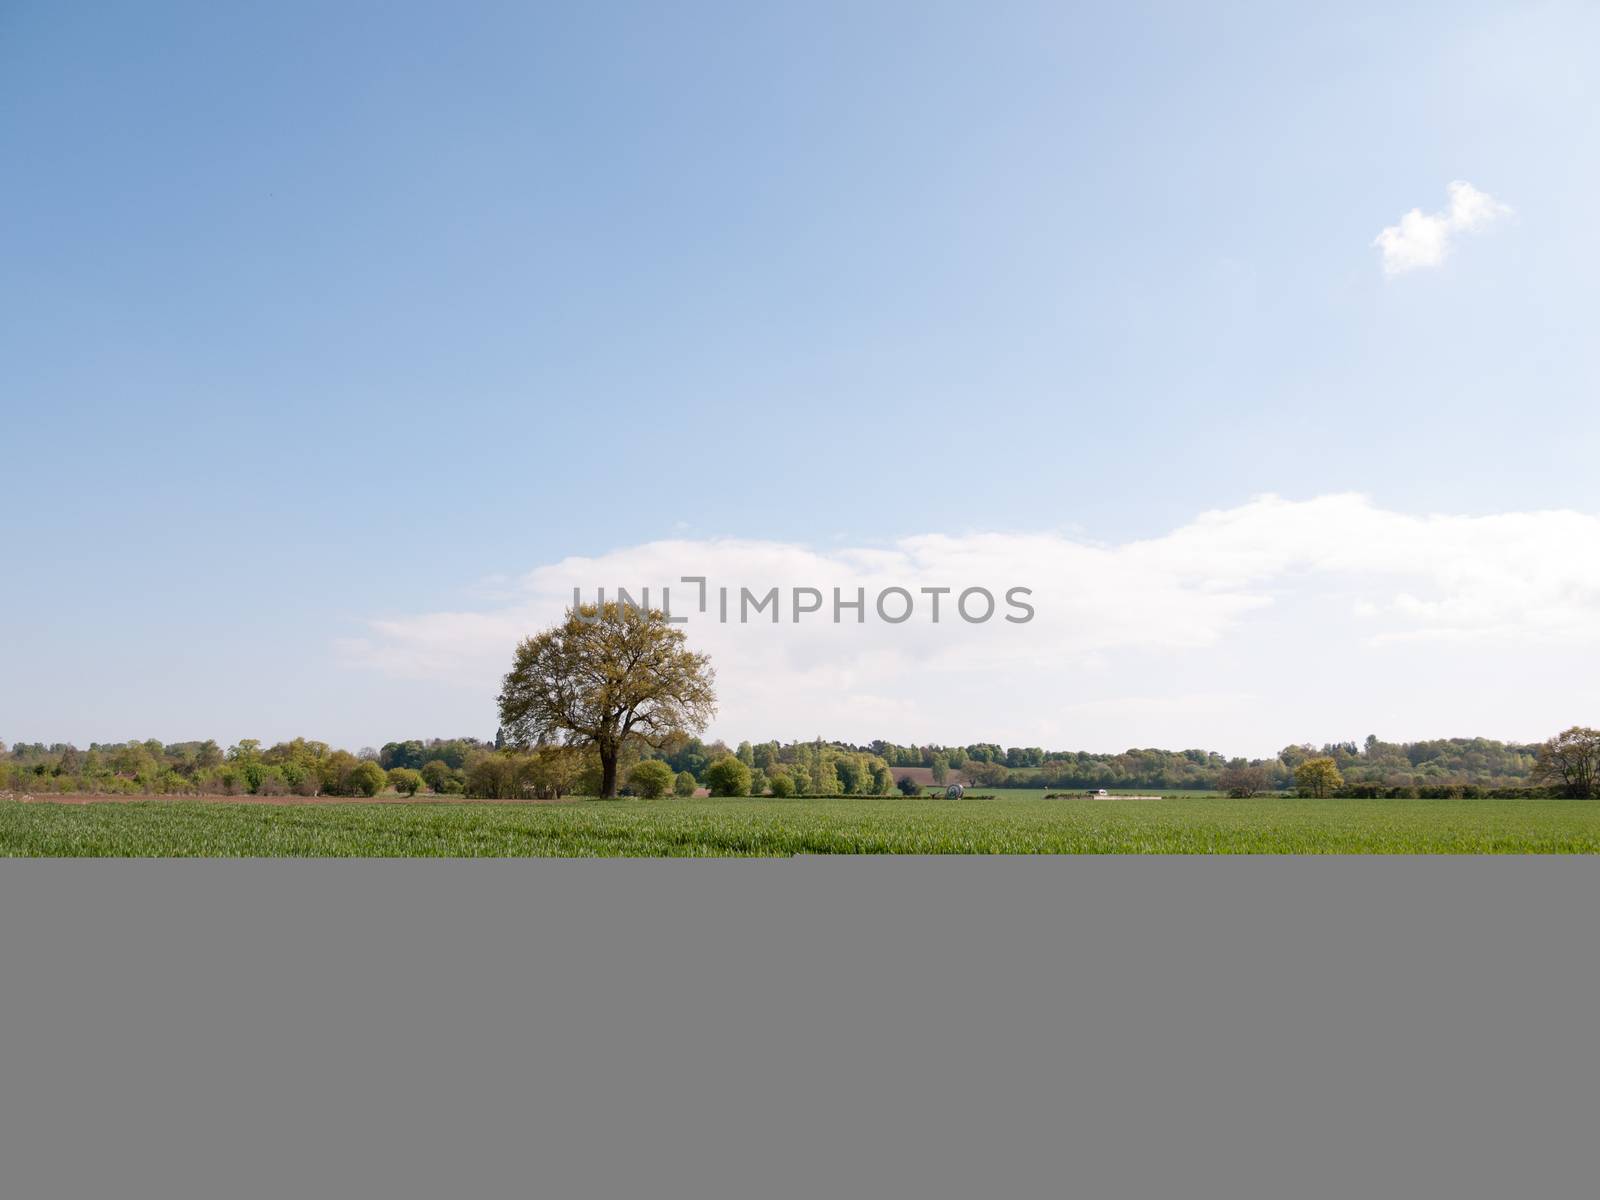 an open field of green grass and grain and agriculture with a tree in the distance and a blue sky